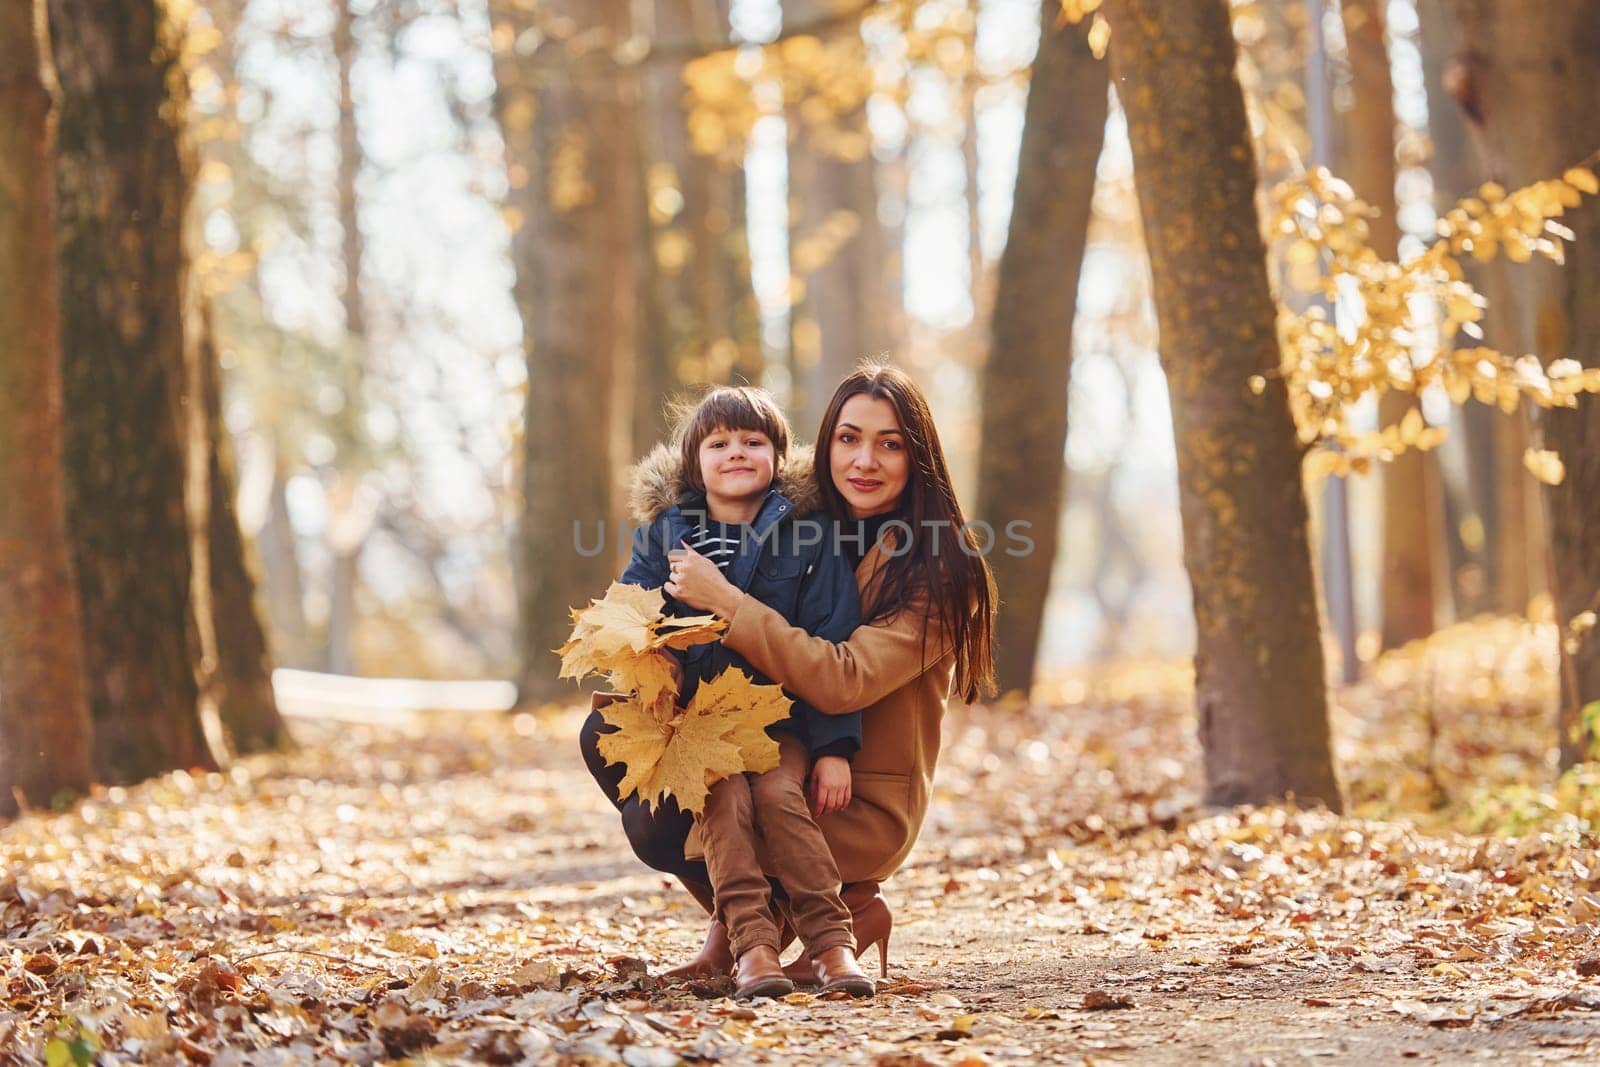 Front view. Mother with her son is having fun outdoors in the autumn forest.